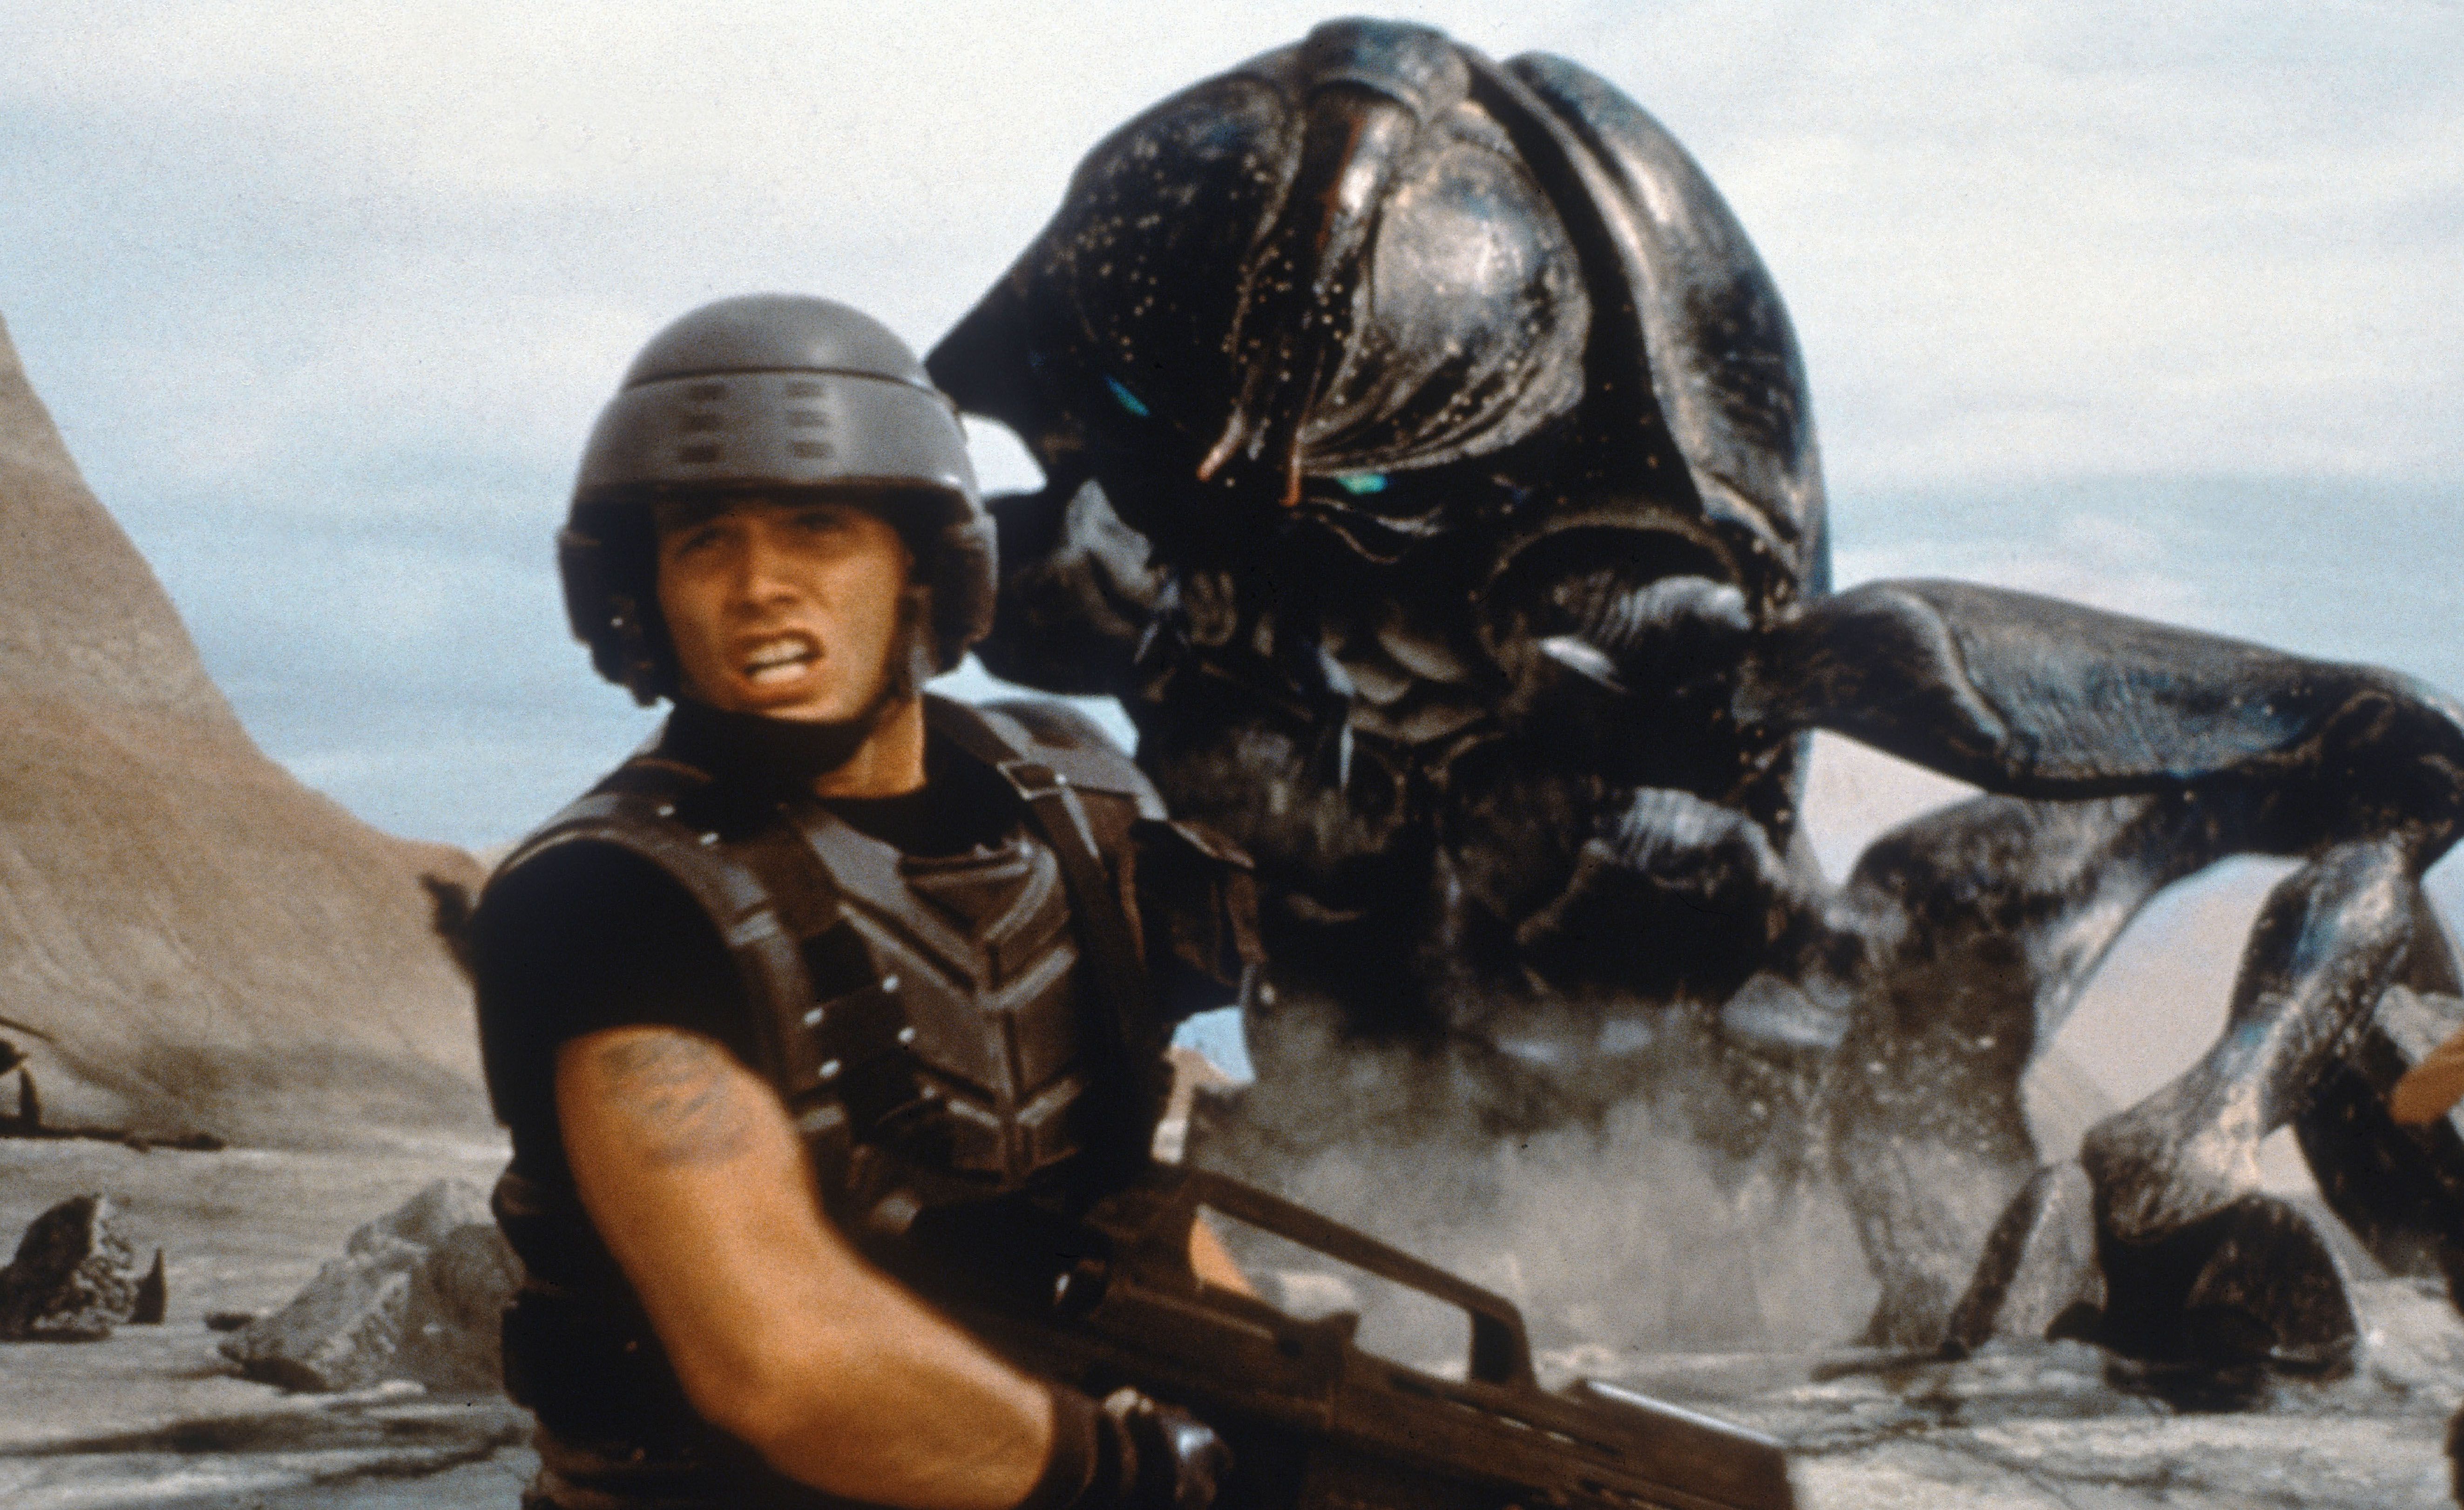 Strap in, Starship Troopers and its giant alien bugs are being rebooted